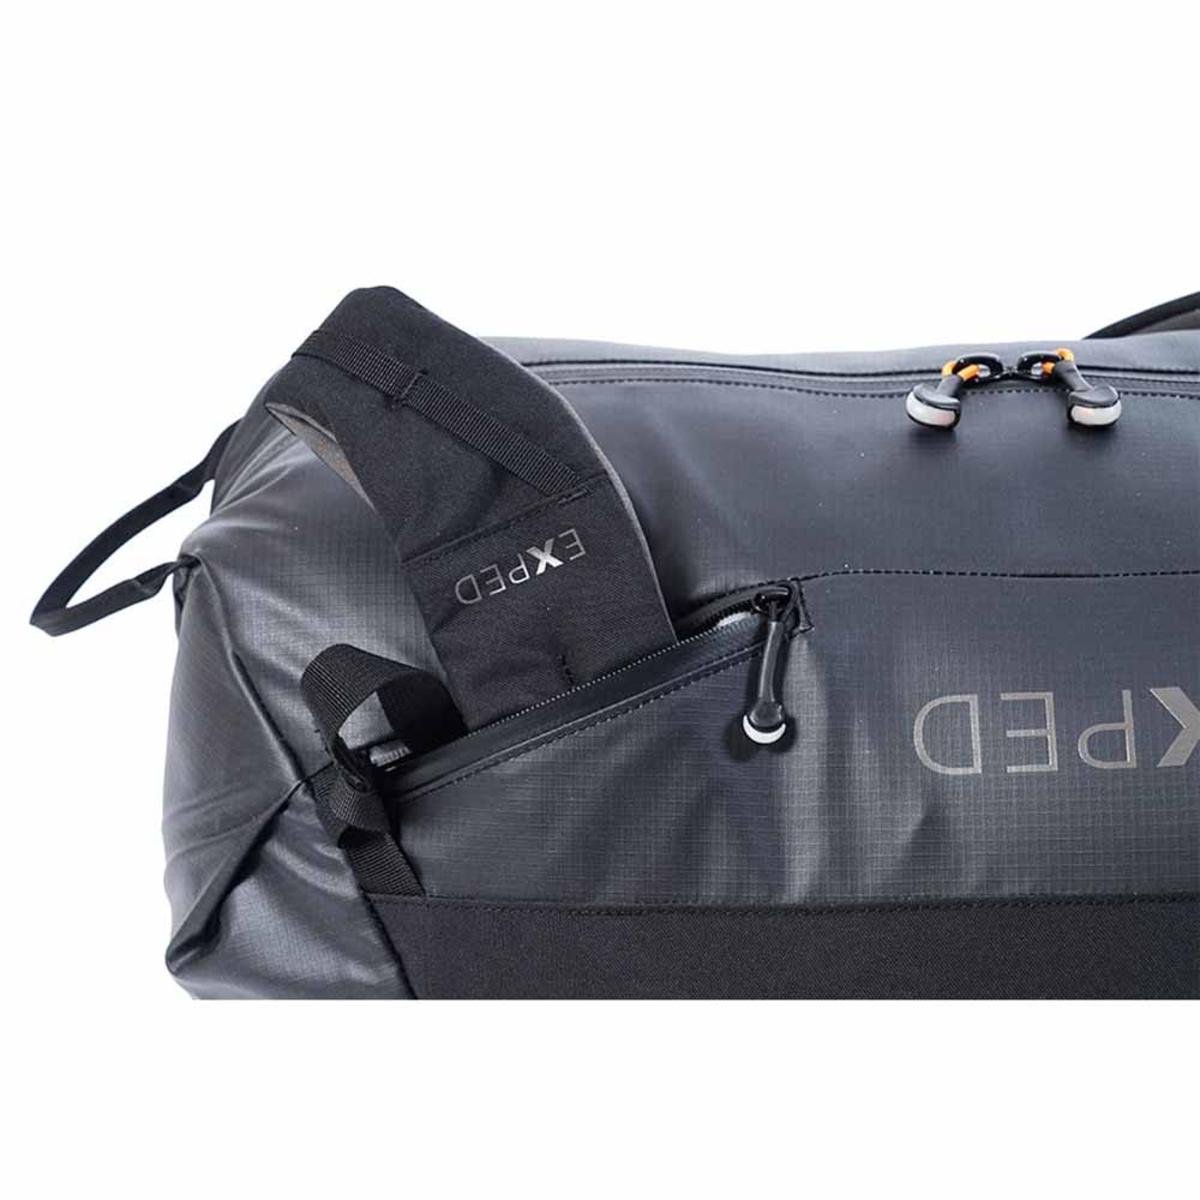 Exped Radical 60L Duffle Backpack